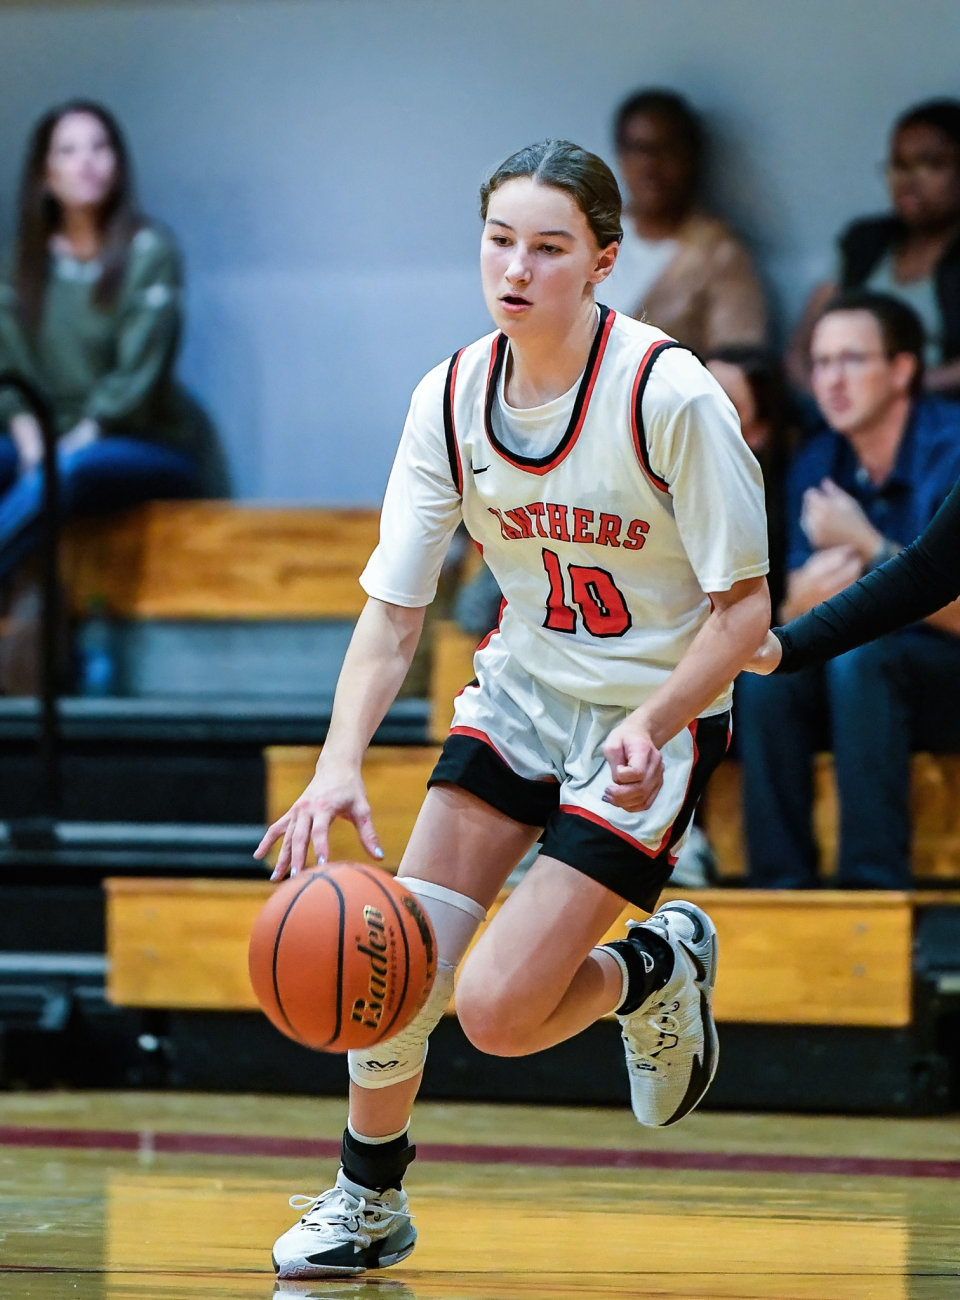 Hyde Park freshman Grace Bagan, who scored 40 points in a recent game, was voted the Covert Chevrolet Bastrop Austin-area Girls Athlete of the Week for Jan. 1-6.